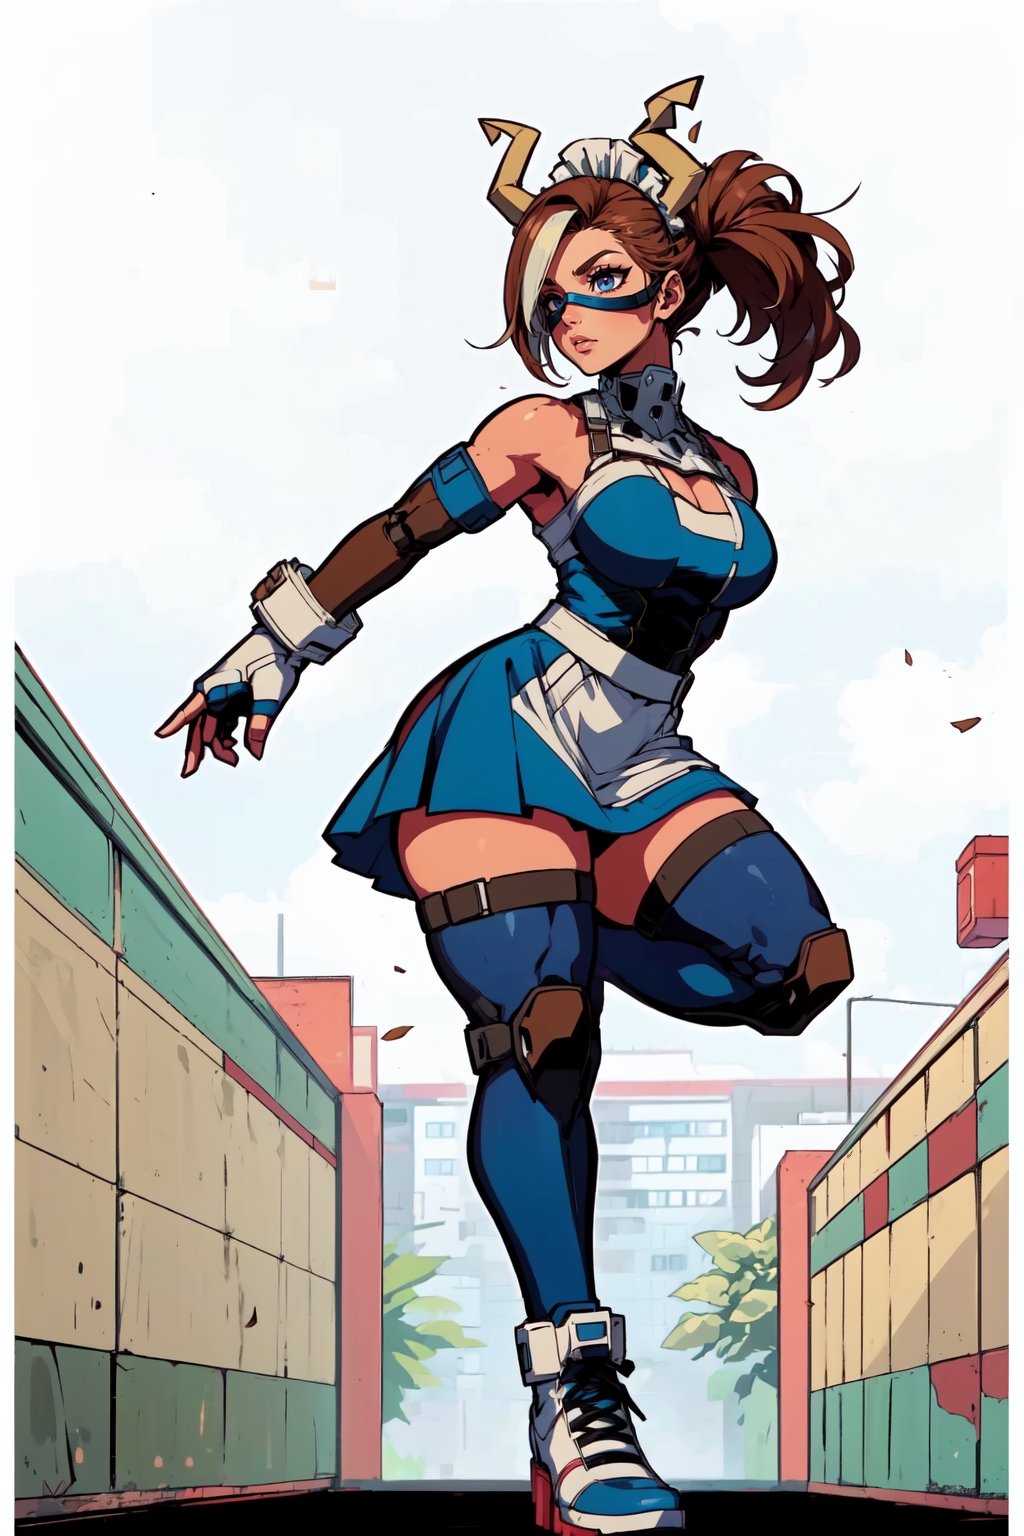 (18 year old girl:1.1),  (Extra thicc body:1.1),  (Brown skin with vitiligo:1.1),  medium breasts,  thick thighs,  (medium muscles:1.1),  (thick outlines:1.1),  walk pose,  (black maid outfit fused with a Mexican wrestler:1.1),  medium skirt,  showing a little black panties , ( long blue latex stockings:1.1),  (((blue latex sleeves))),  (((white knee and elbow pads:1.1))),  (((wearing a hero eyemask:1.1))),  (((with two big bull horns on the sides of her head:1.1))),  two ponytails,  (((brown hair with blue highlights:1))),  (long blue fighting boots:1.1),  ((( blue kick boxing fingerless gloves:1.1))),  full body figure,  3 perspective,  purple eyes,  (((dark blue dress))),  black,  white and gold,  photorealistic, ( perfect hands:1.1),  masterpiece:1.2, ( detailed face:1.1), (Background Tijuana Gym arcade neon:1), Sandbags are  x men centinels robots, Add more detail,Nobara,lilyms,igawasakura,eft_jjk_nobara,hanging sandbag,ShinobuKochou_NDV,1girl,miami_vice_arcade_retreat,KOFAngel,bodysuit